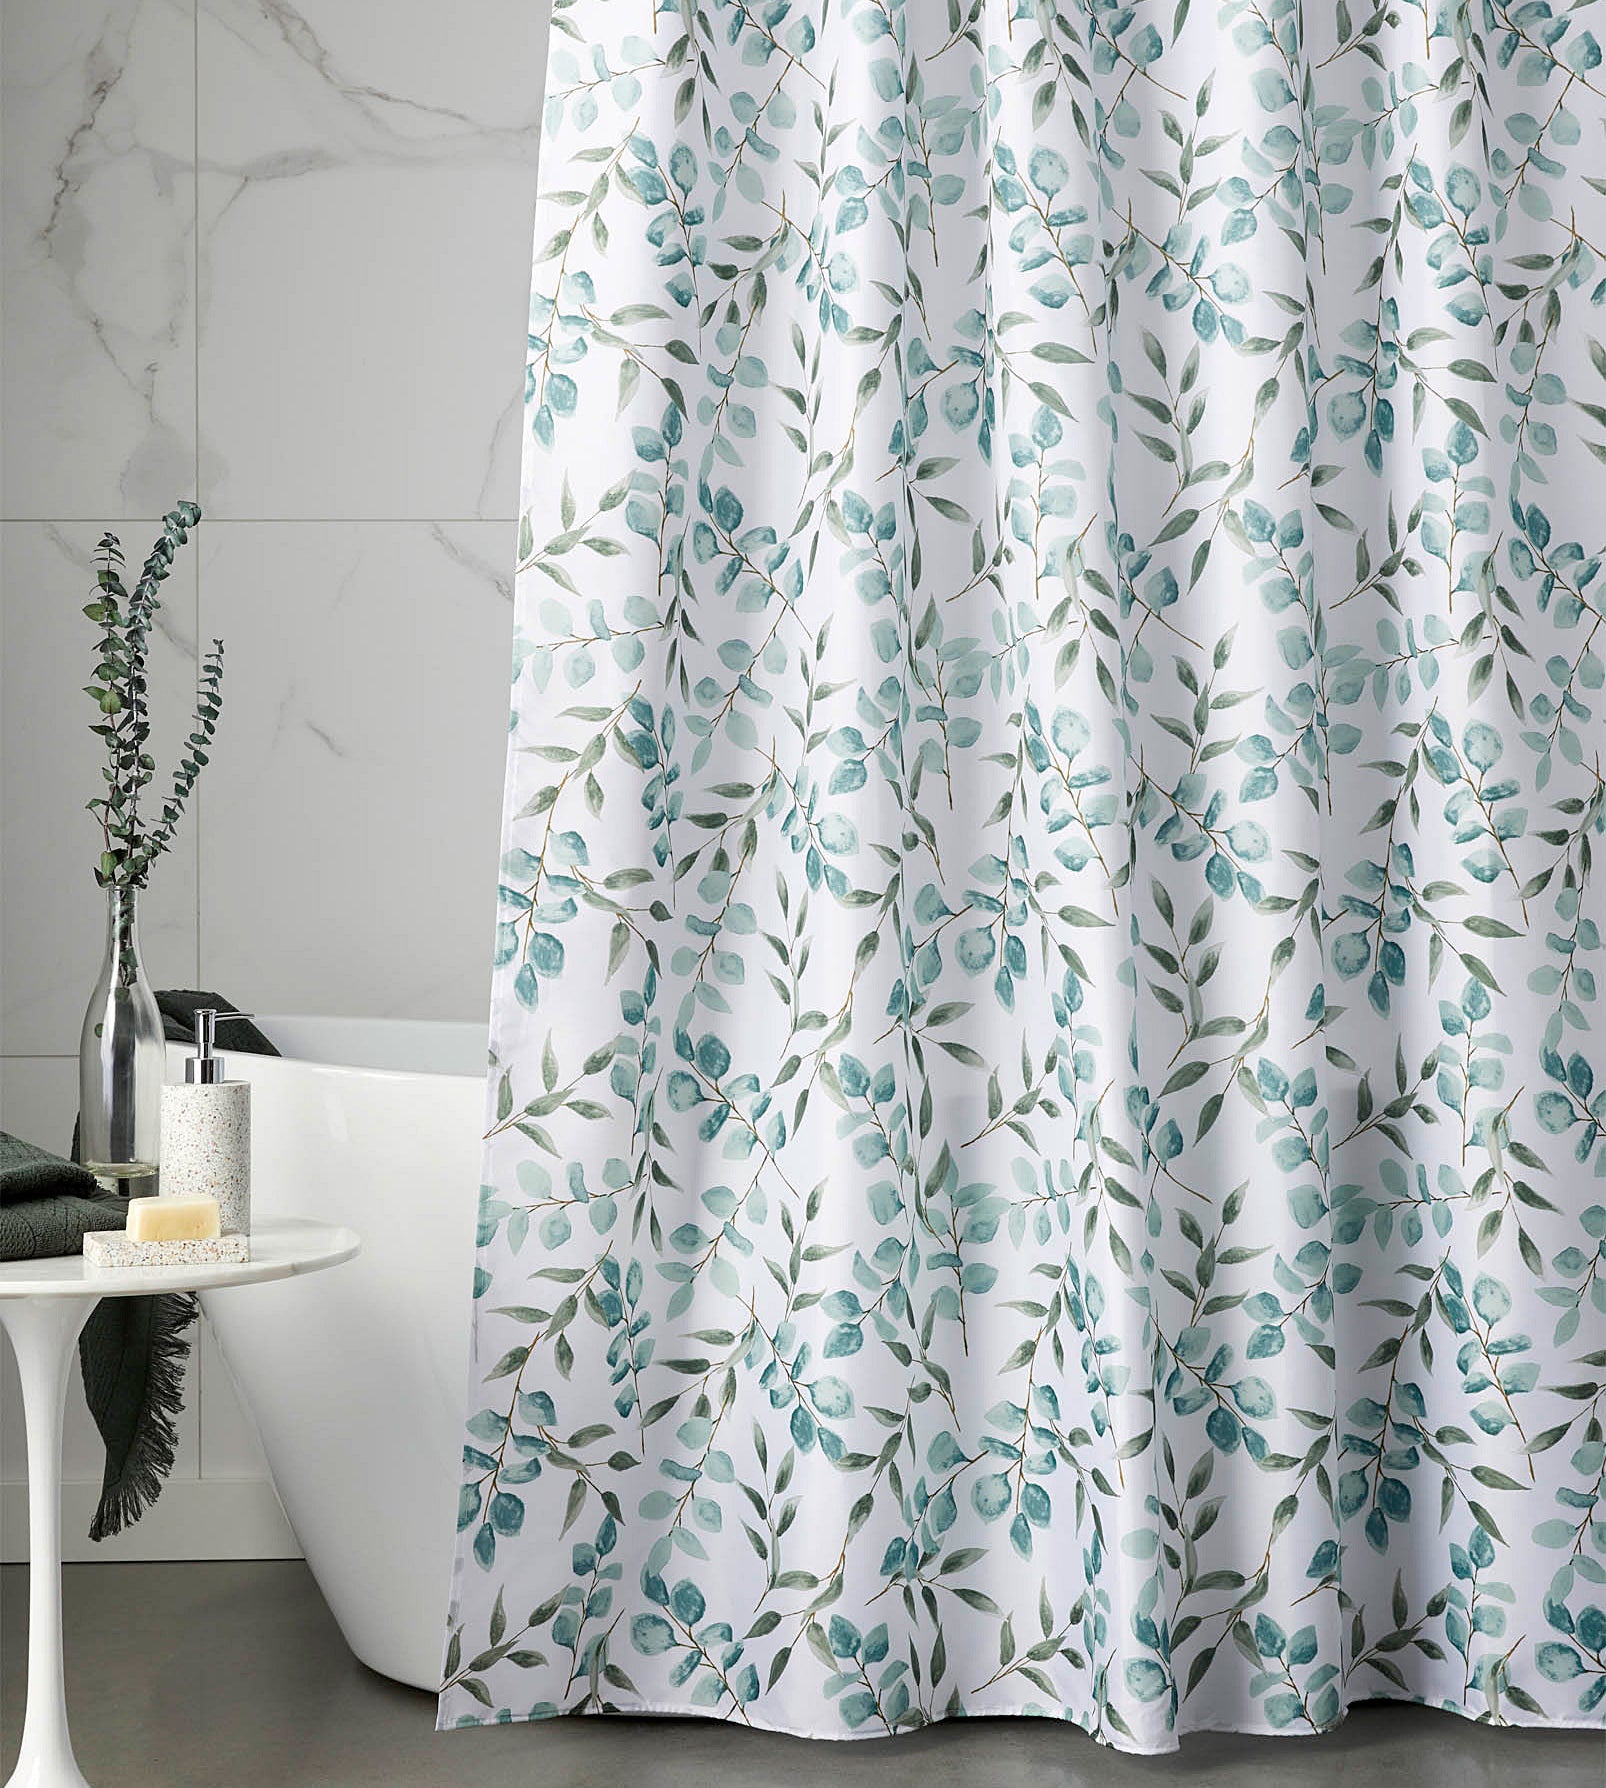 A cute patterned shower curtain 